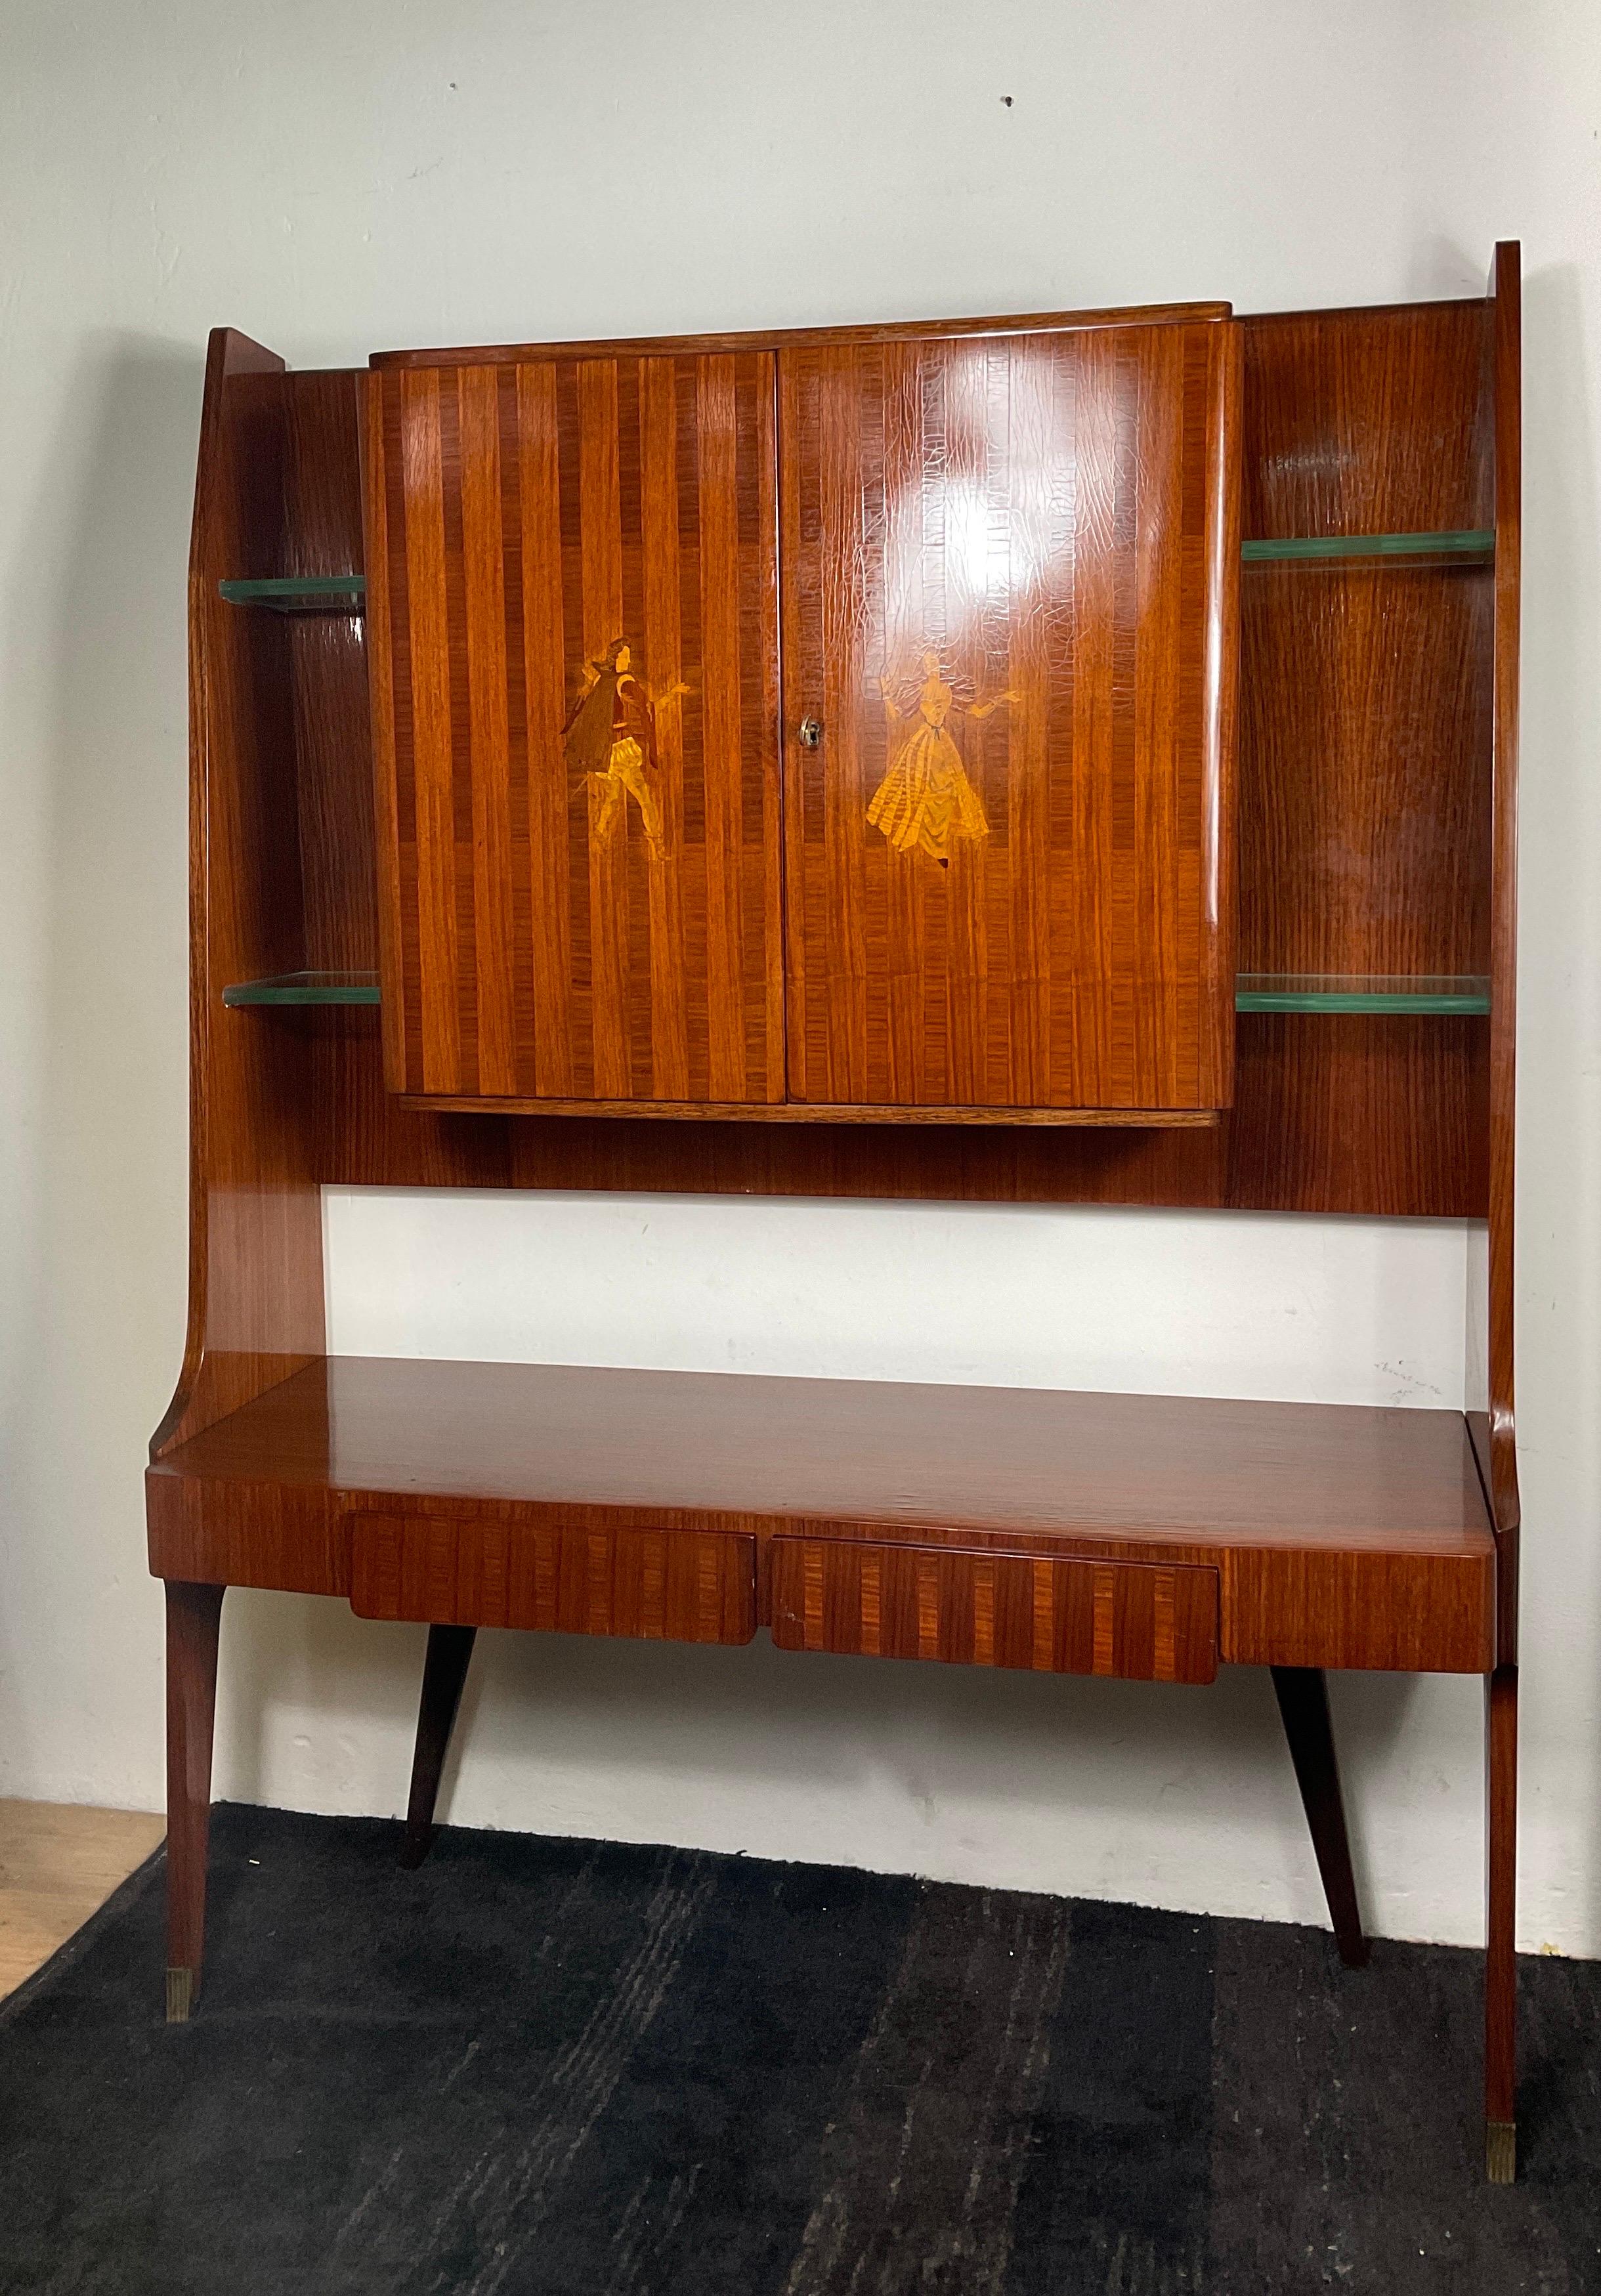 Moveable bar by Vittorio Dassi from the 50s. In maple and mahogany wood, doors with inlaid decorations, with two drawers and thick crystal shelves both outside and inside. Rear legs and drawers in dark colour, bridge structure, brass tips. In good